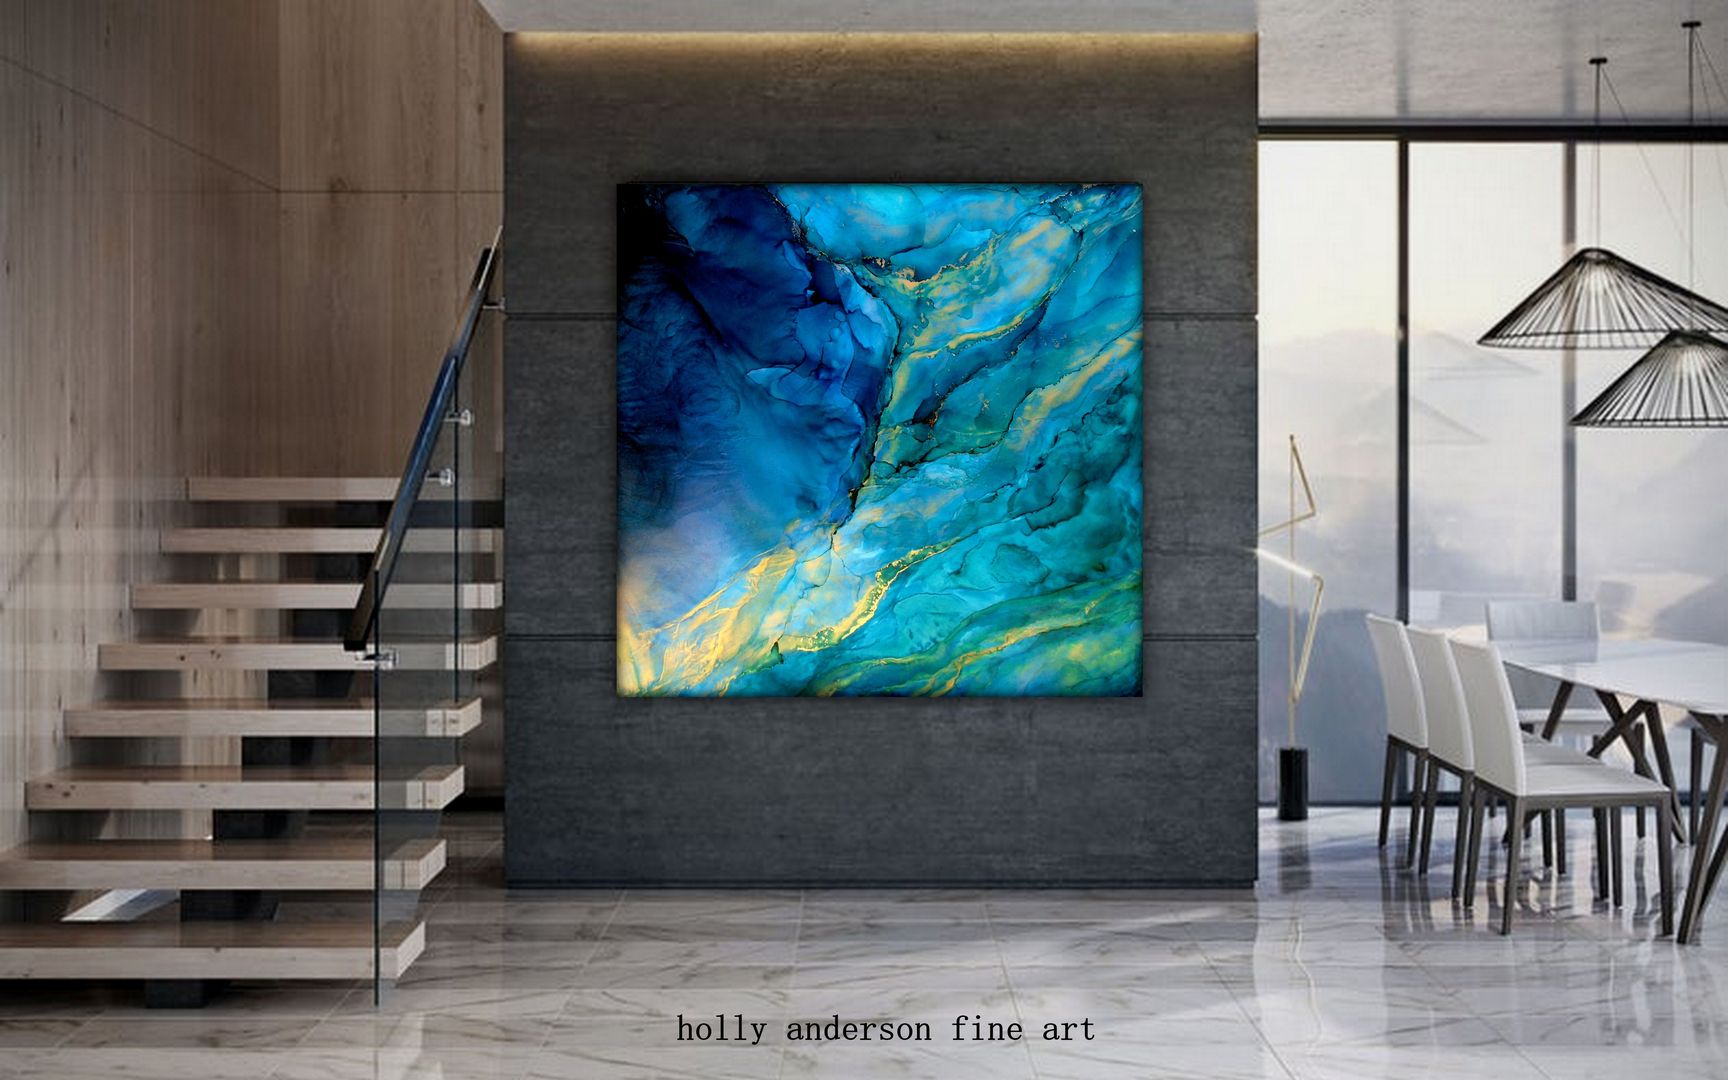 Original Large Alcohol Ink Art Fluid Painting Blue, Green, Gold colors, Abstract Art, Underwater Painting, modern art GLACIRI, Holly Anderson Fine Art Holly Anderson Fine Art Salones modernos